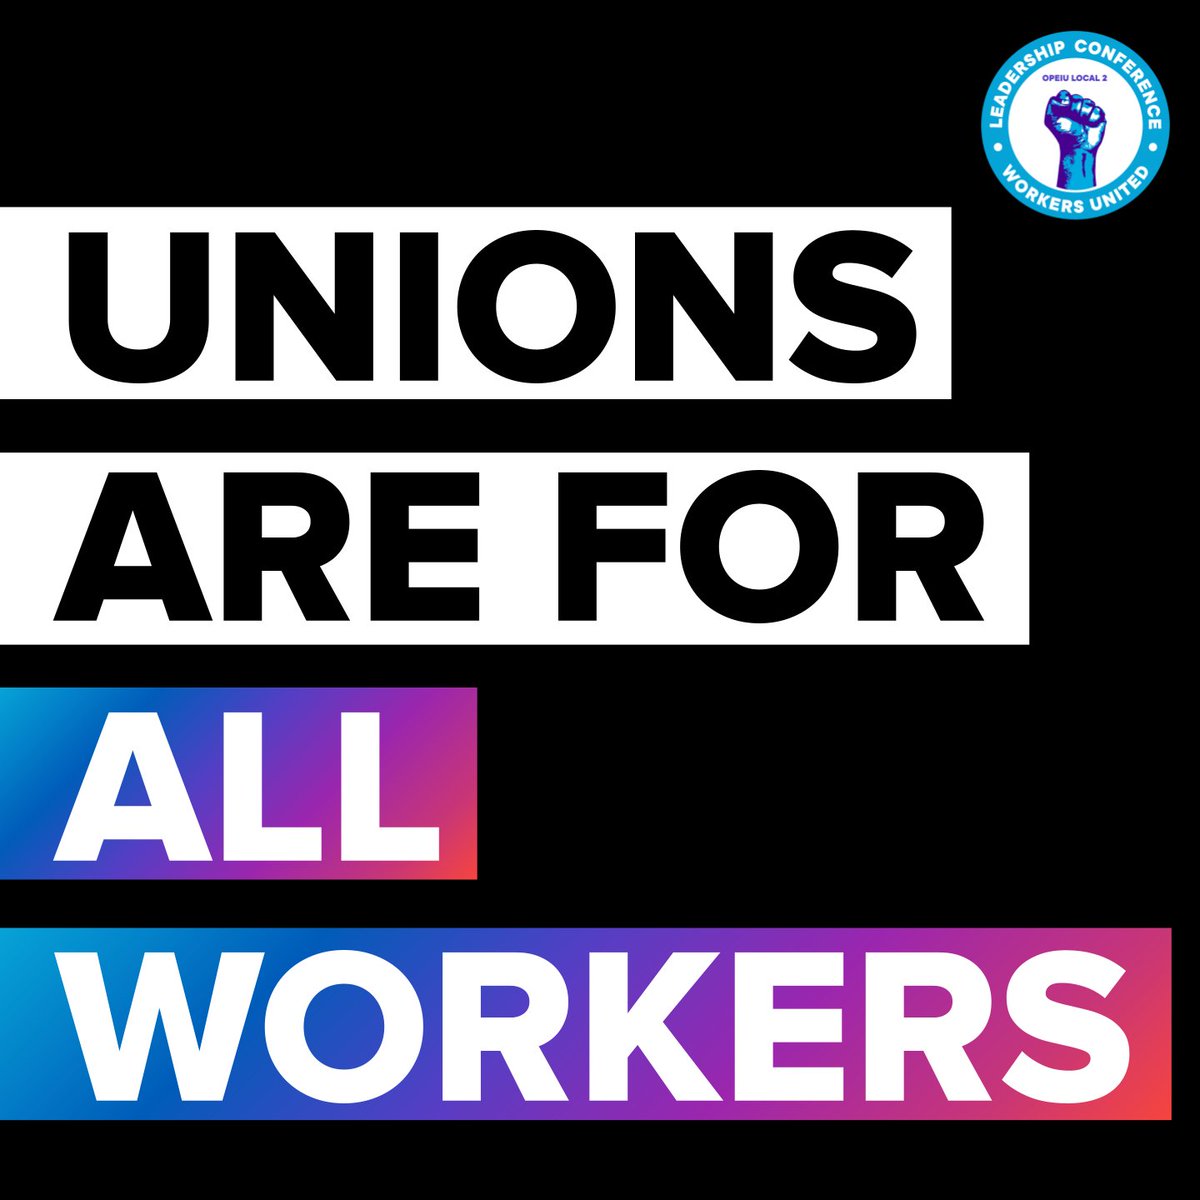 The right to form a union and engage in collective bargaining is a fundamental civil right. That's why unions are for all workers - no matter where you work or under what conditions you work.

#WorkersDay2022